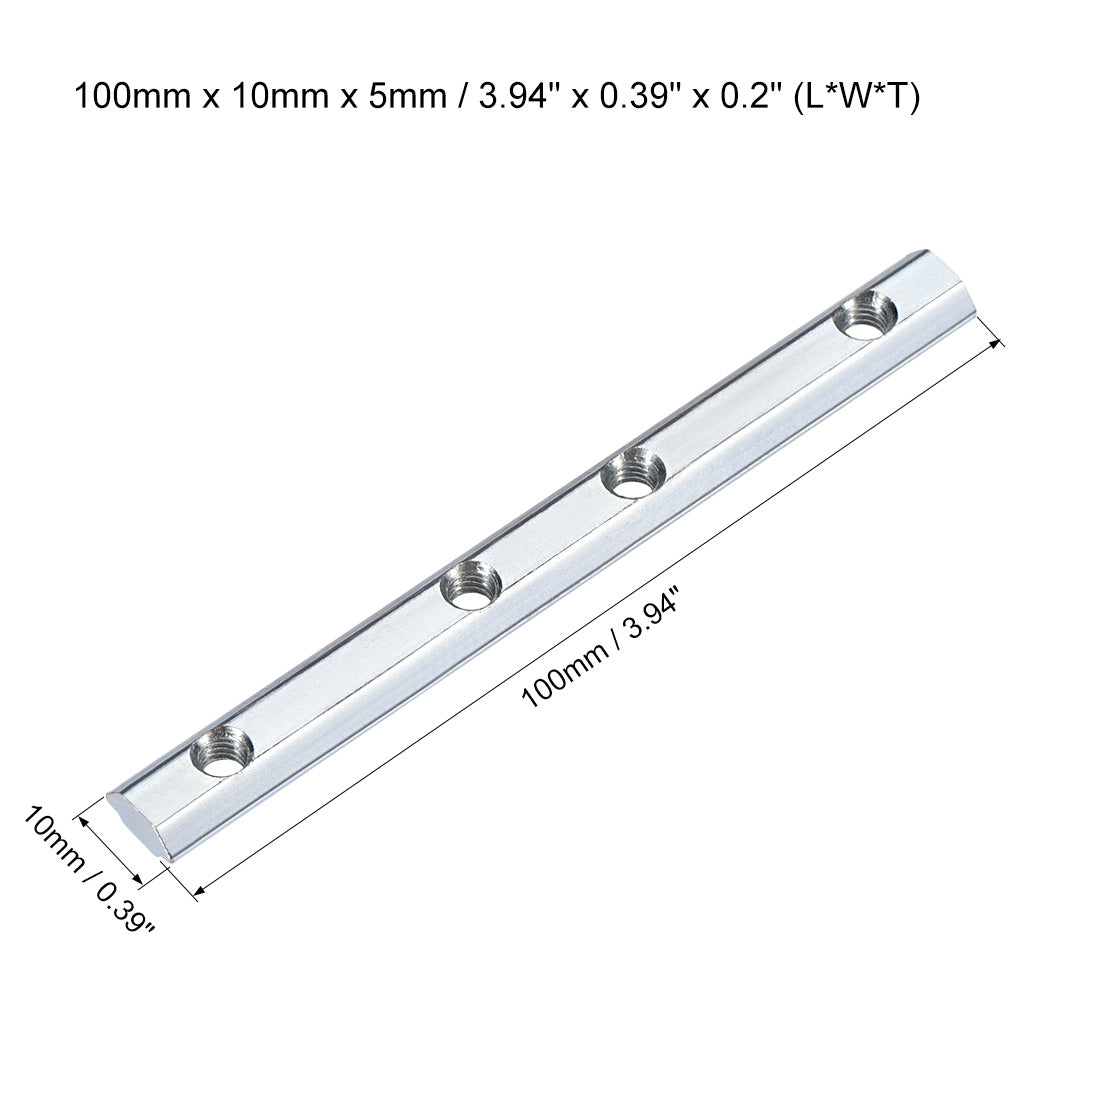 uxcell Uxcell Straight Line Connector, 3.9 Inch Joint Bracket for 2020 Series T Slot 6mm Aluminum Extrusion Profile, 2 Pcs